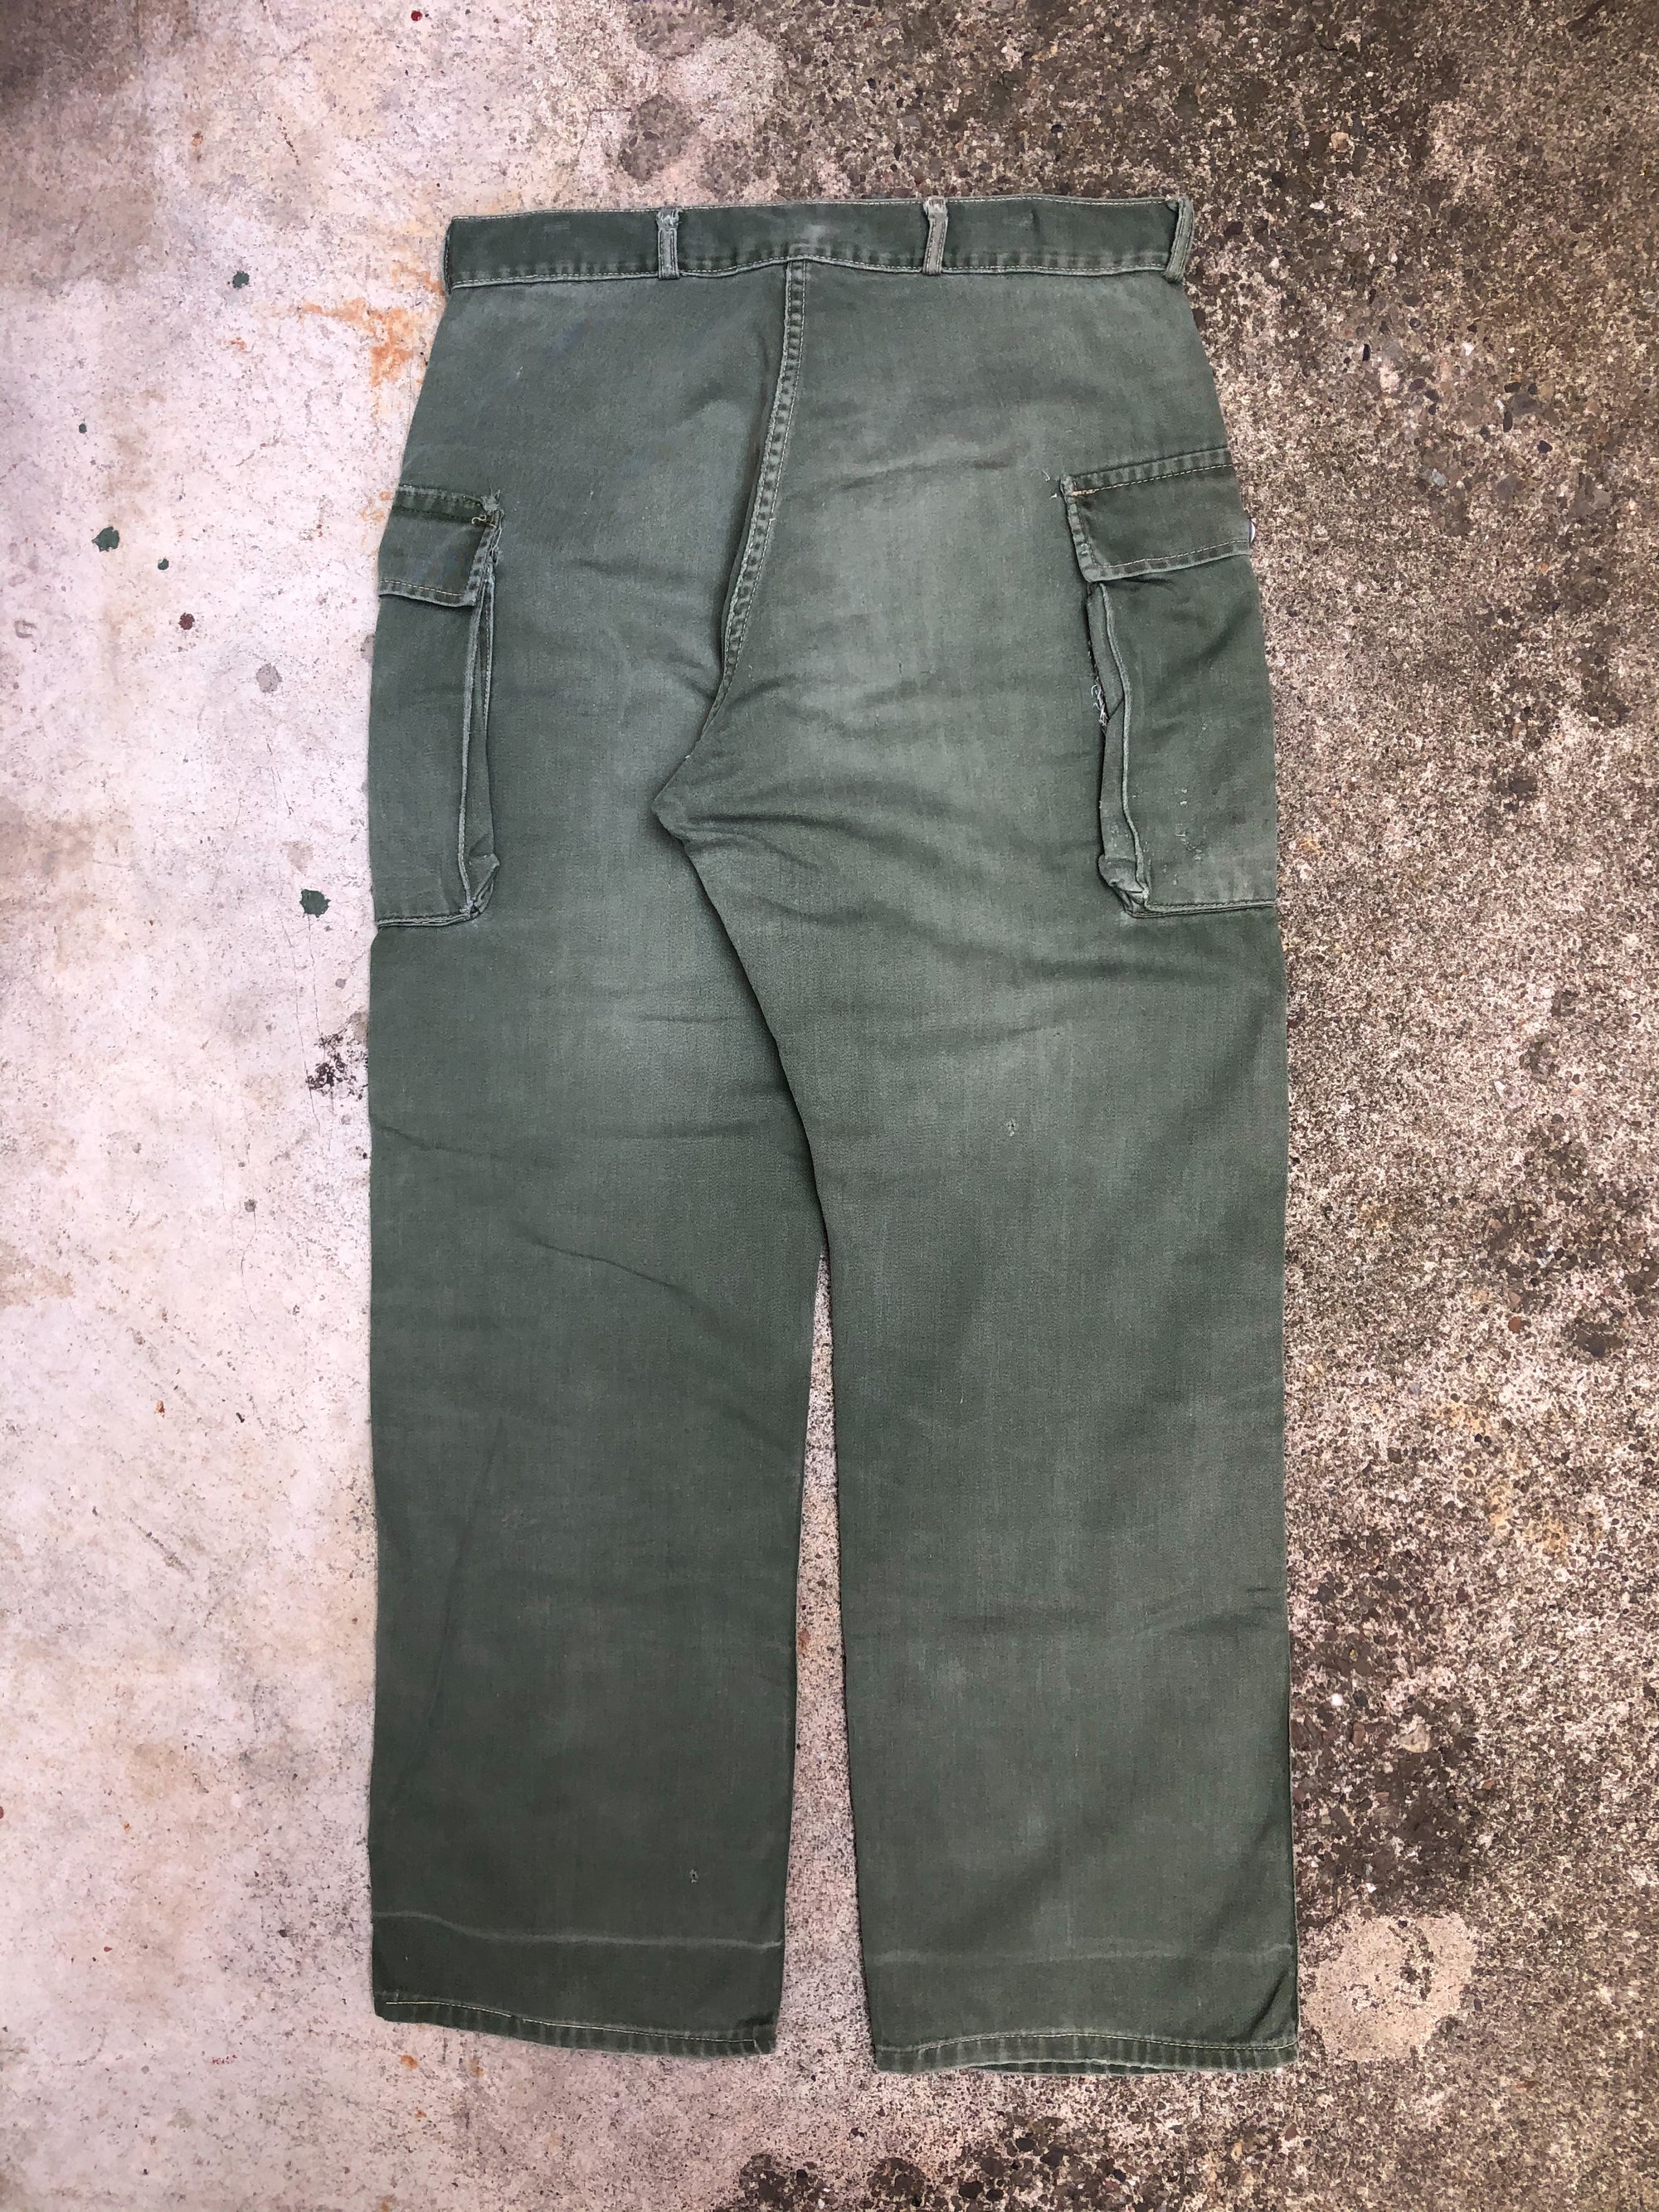 1950s Faded Green US Army 13 Star Cotton Cargo Field Pants (31X28)